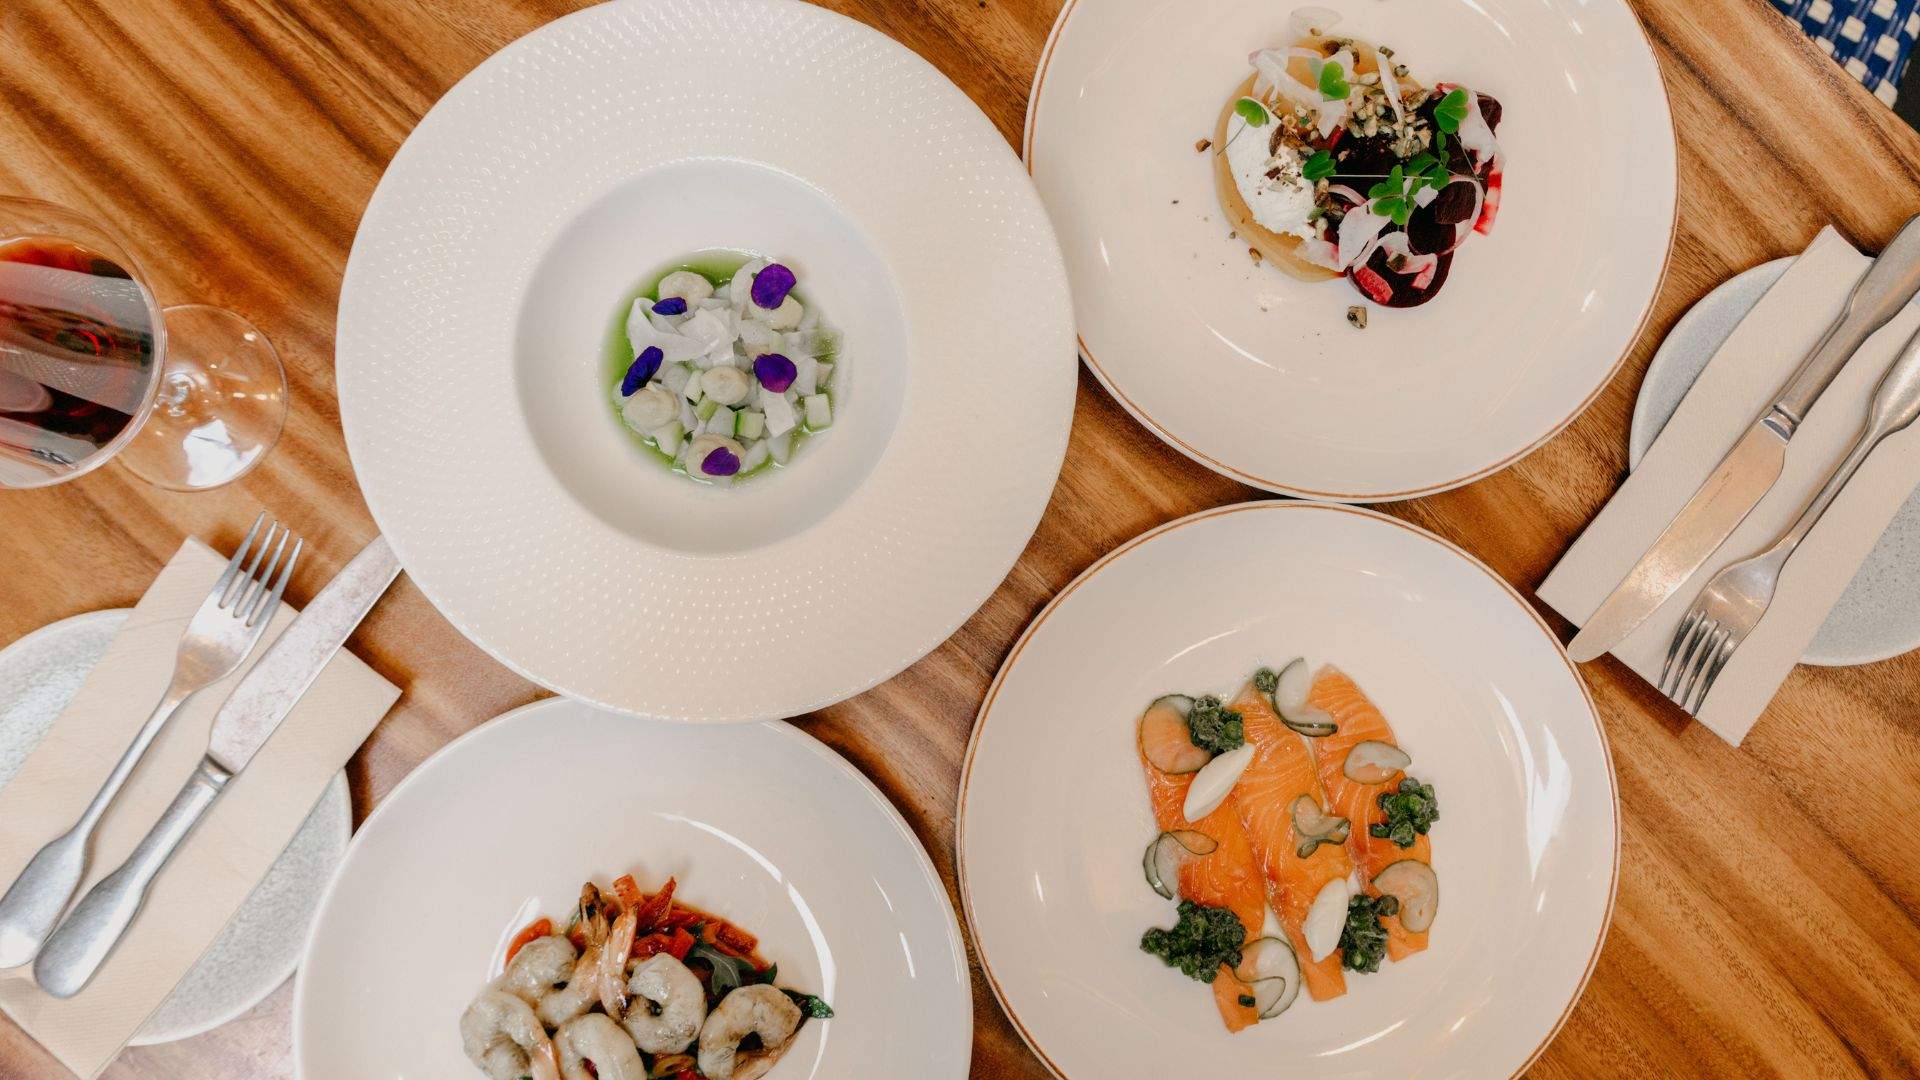 Now Open: Lower Plenty's New Bistro Comes From a Chef with Michelin-Star Pedigree